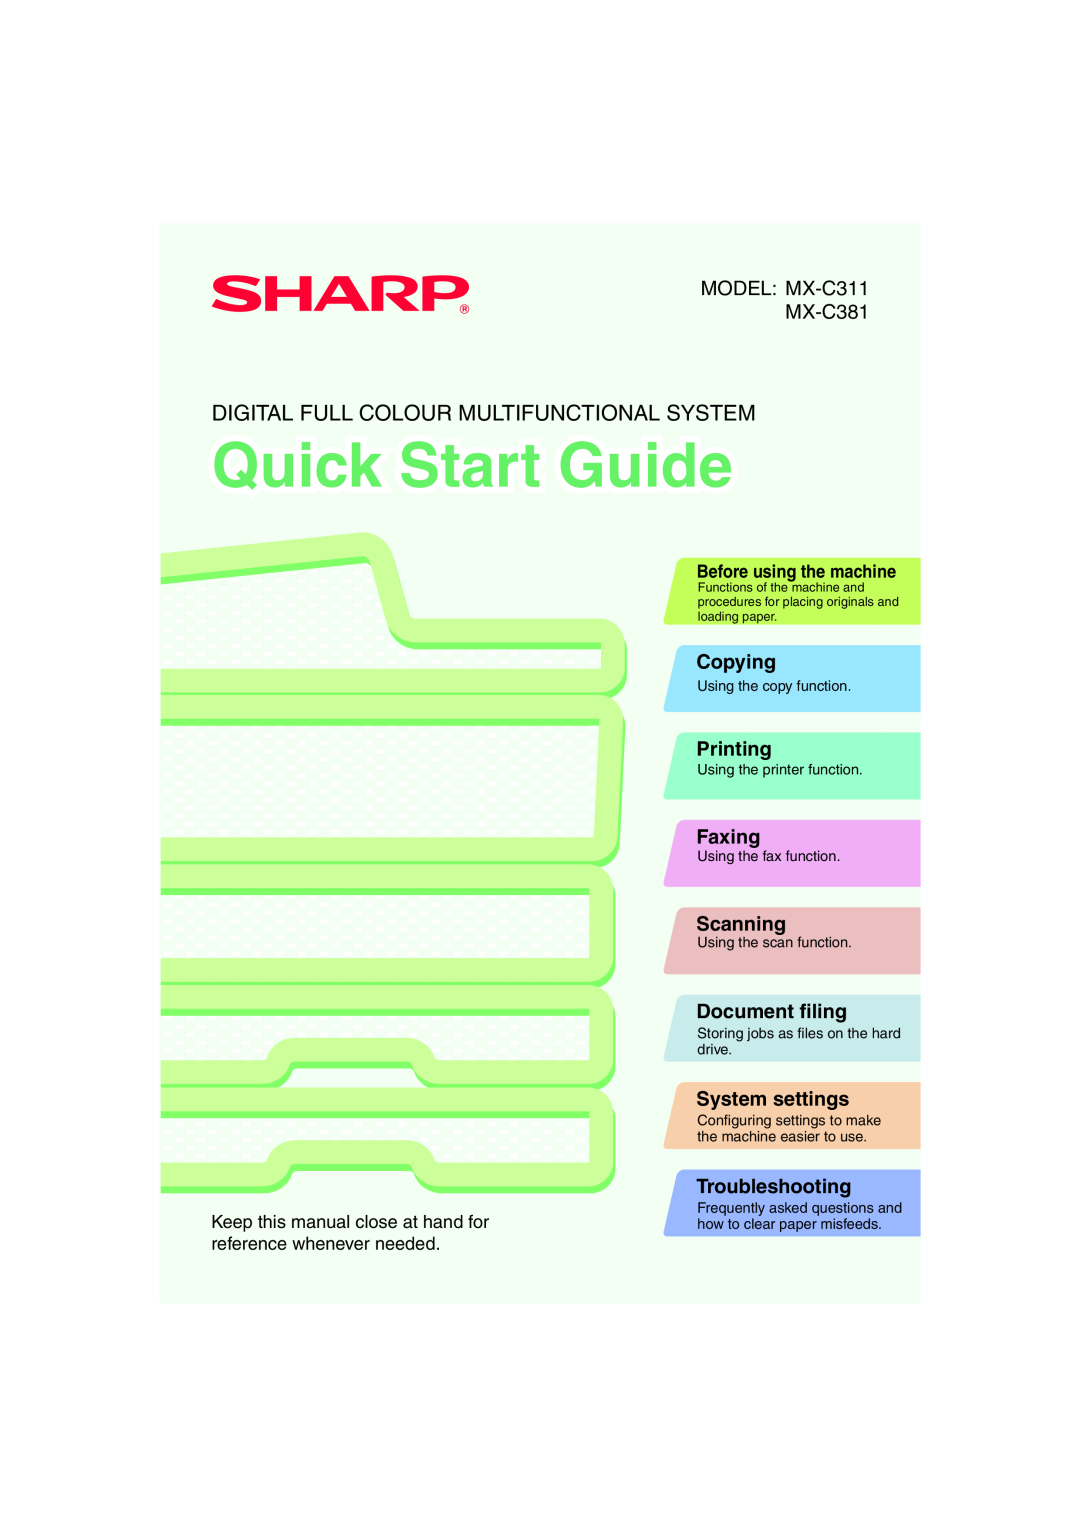 Sharp quick start MODEL MX-C311 MX-C381, Copying, Printing, Faxing, Scanning, Document filing, System settings 